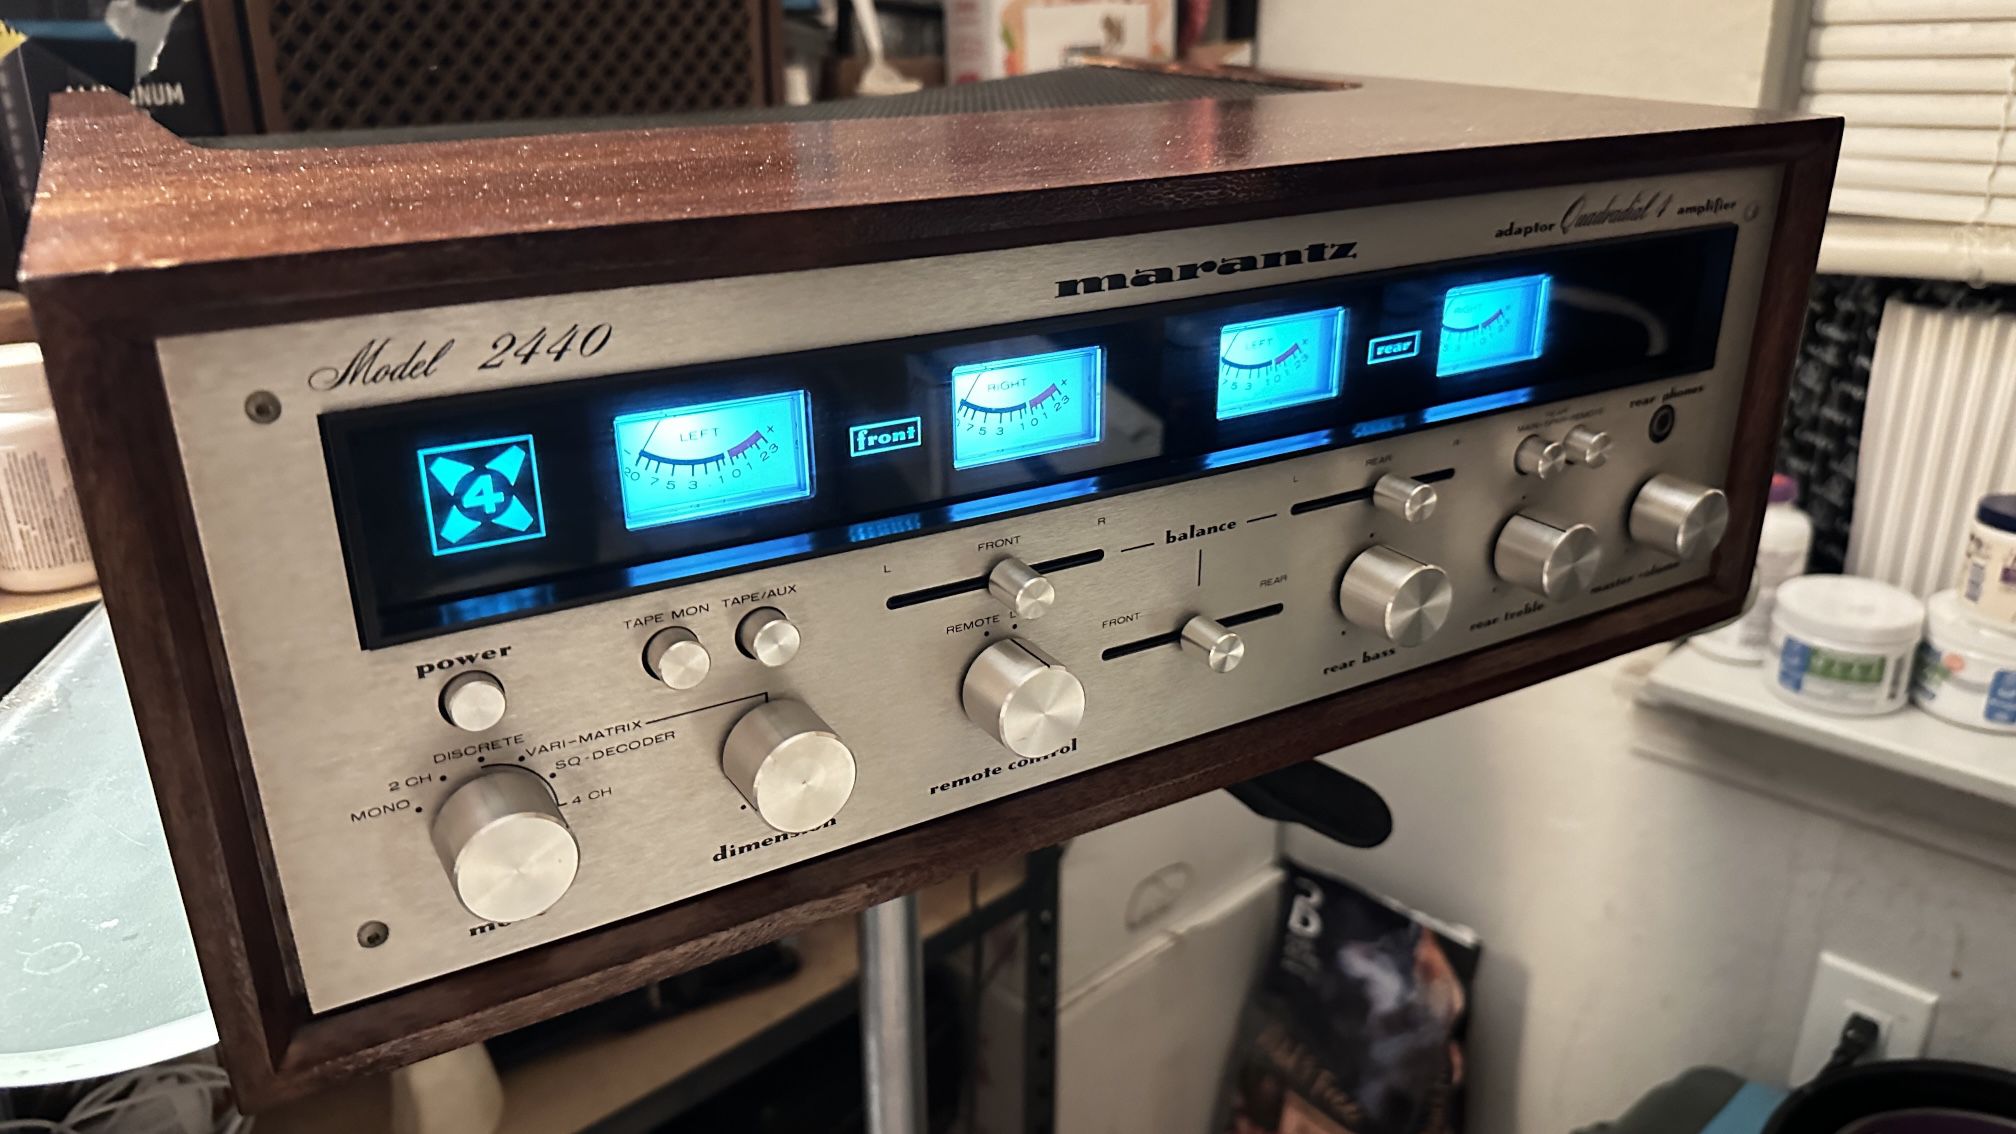 MARANTZ 2440 Quadraphonic Amplifier Restored!!! With SQ Adapter!!  Beautiful Condition… Sounds Incredible!!! All Offers Will Be Considered!!!